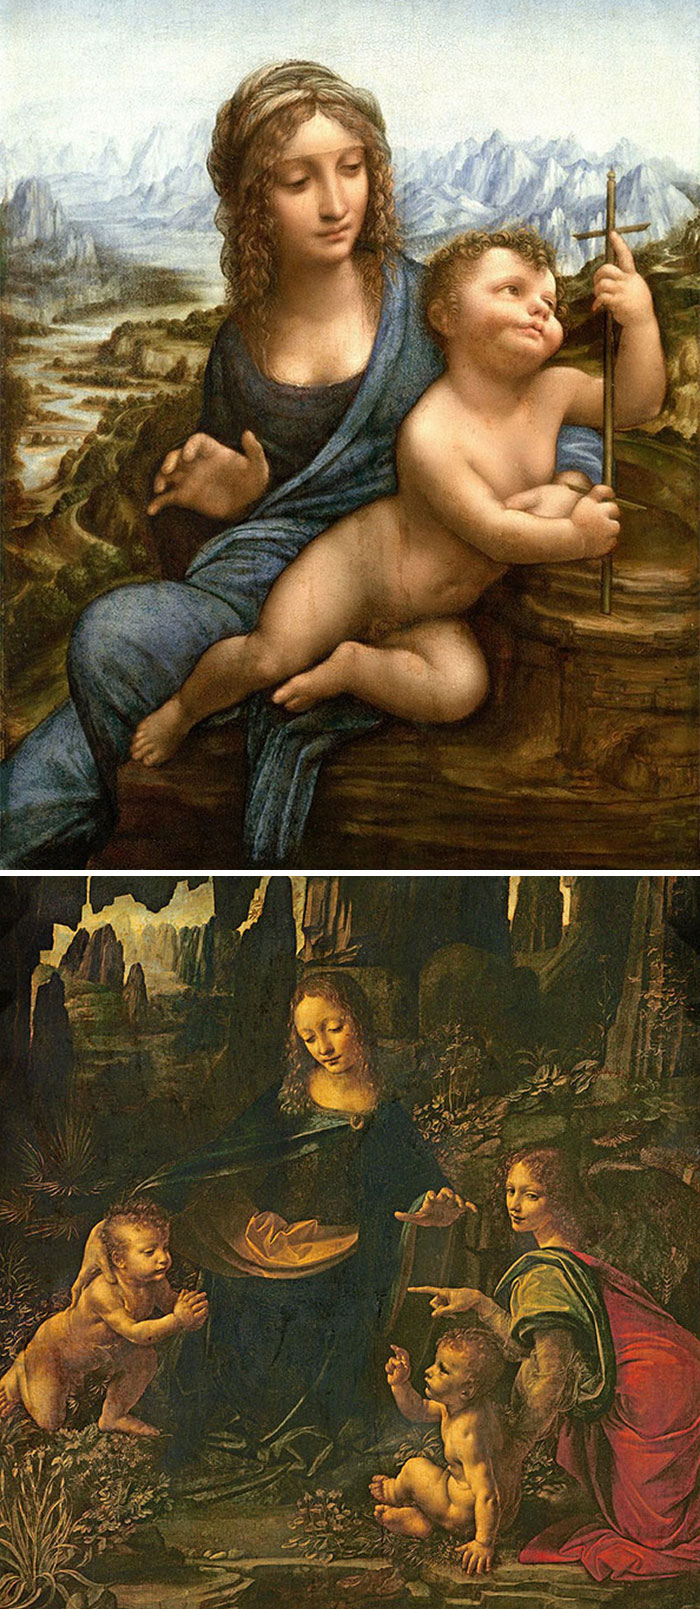 Lord Of The Rings Landscapes With Weird Blue Mist And The Same Wavy-Haired Aristocratic-Nose Madonna, It’s Da Vinci